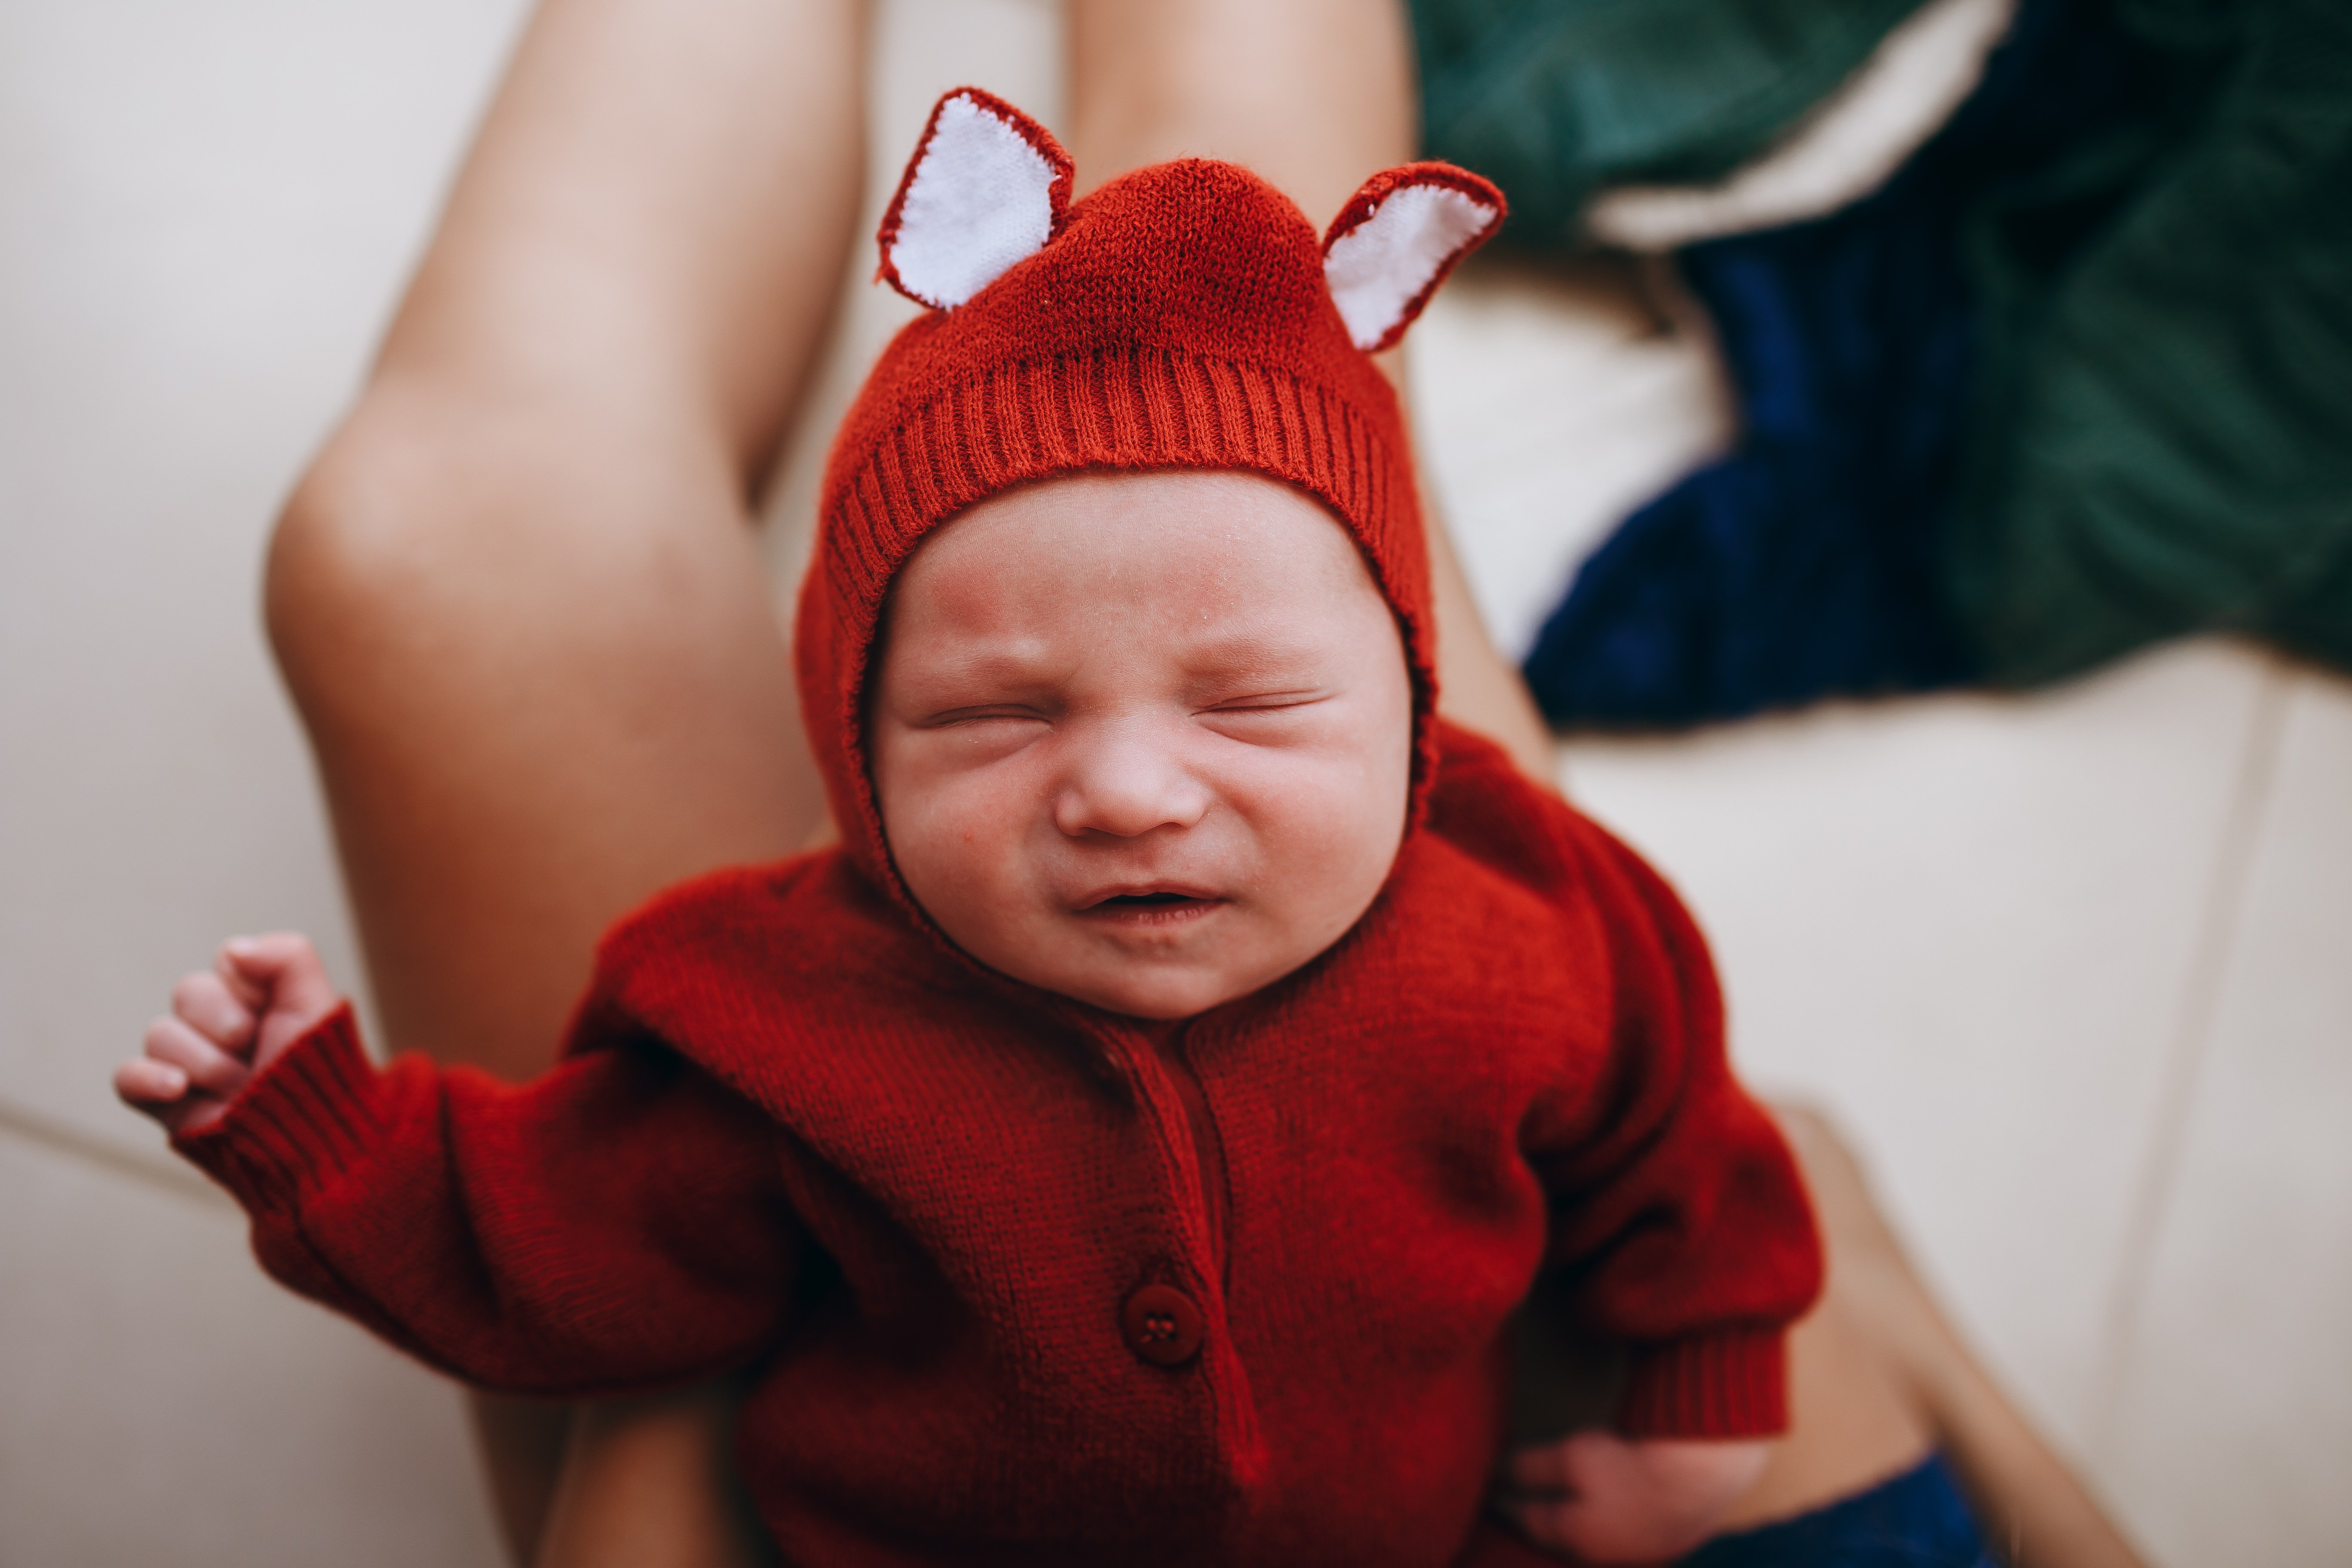 Erica delivered a beautiful baby girl | Photo: Unsplash